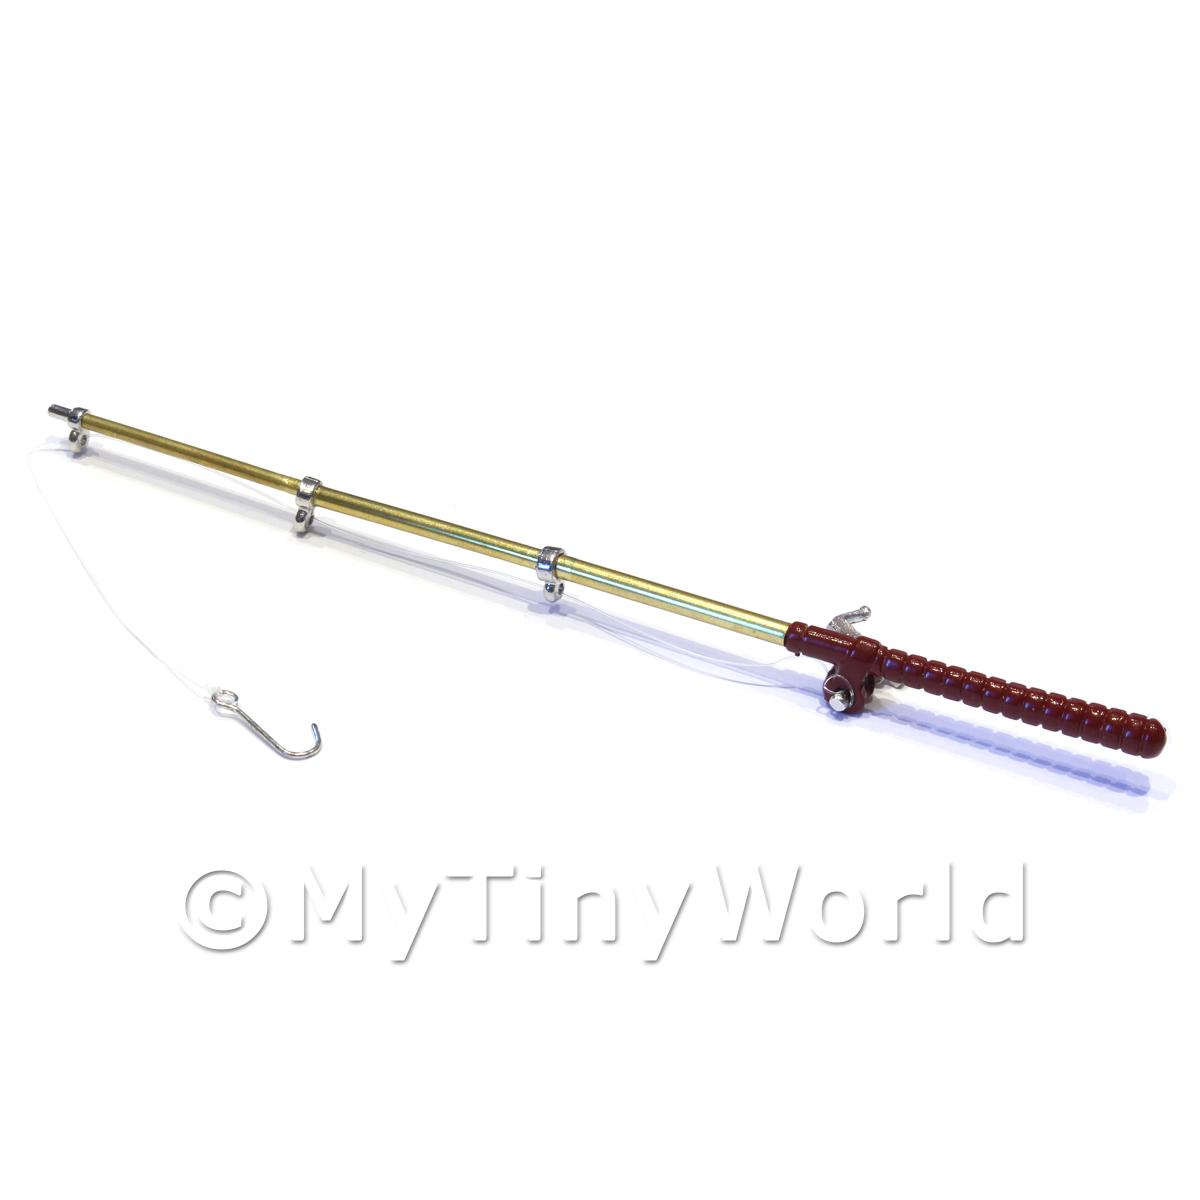 Dolls House Accessories - High Quality Metal Dolls House Fishing Rod With  Working Reel, Product Code 17162